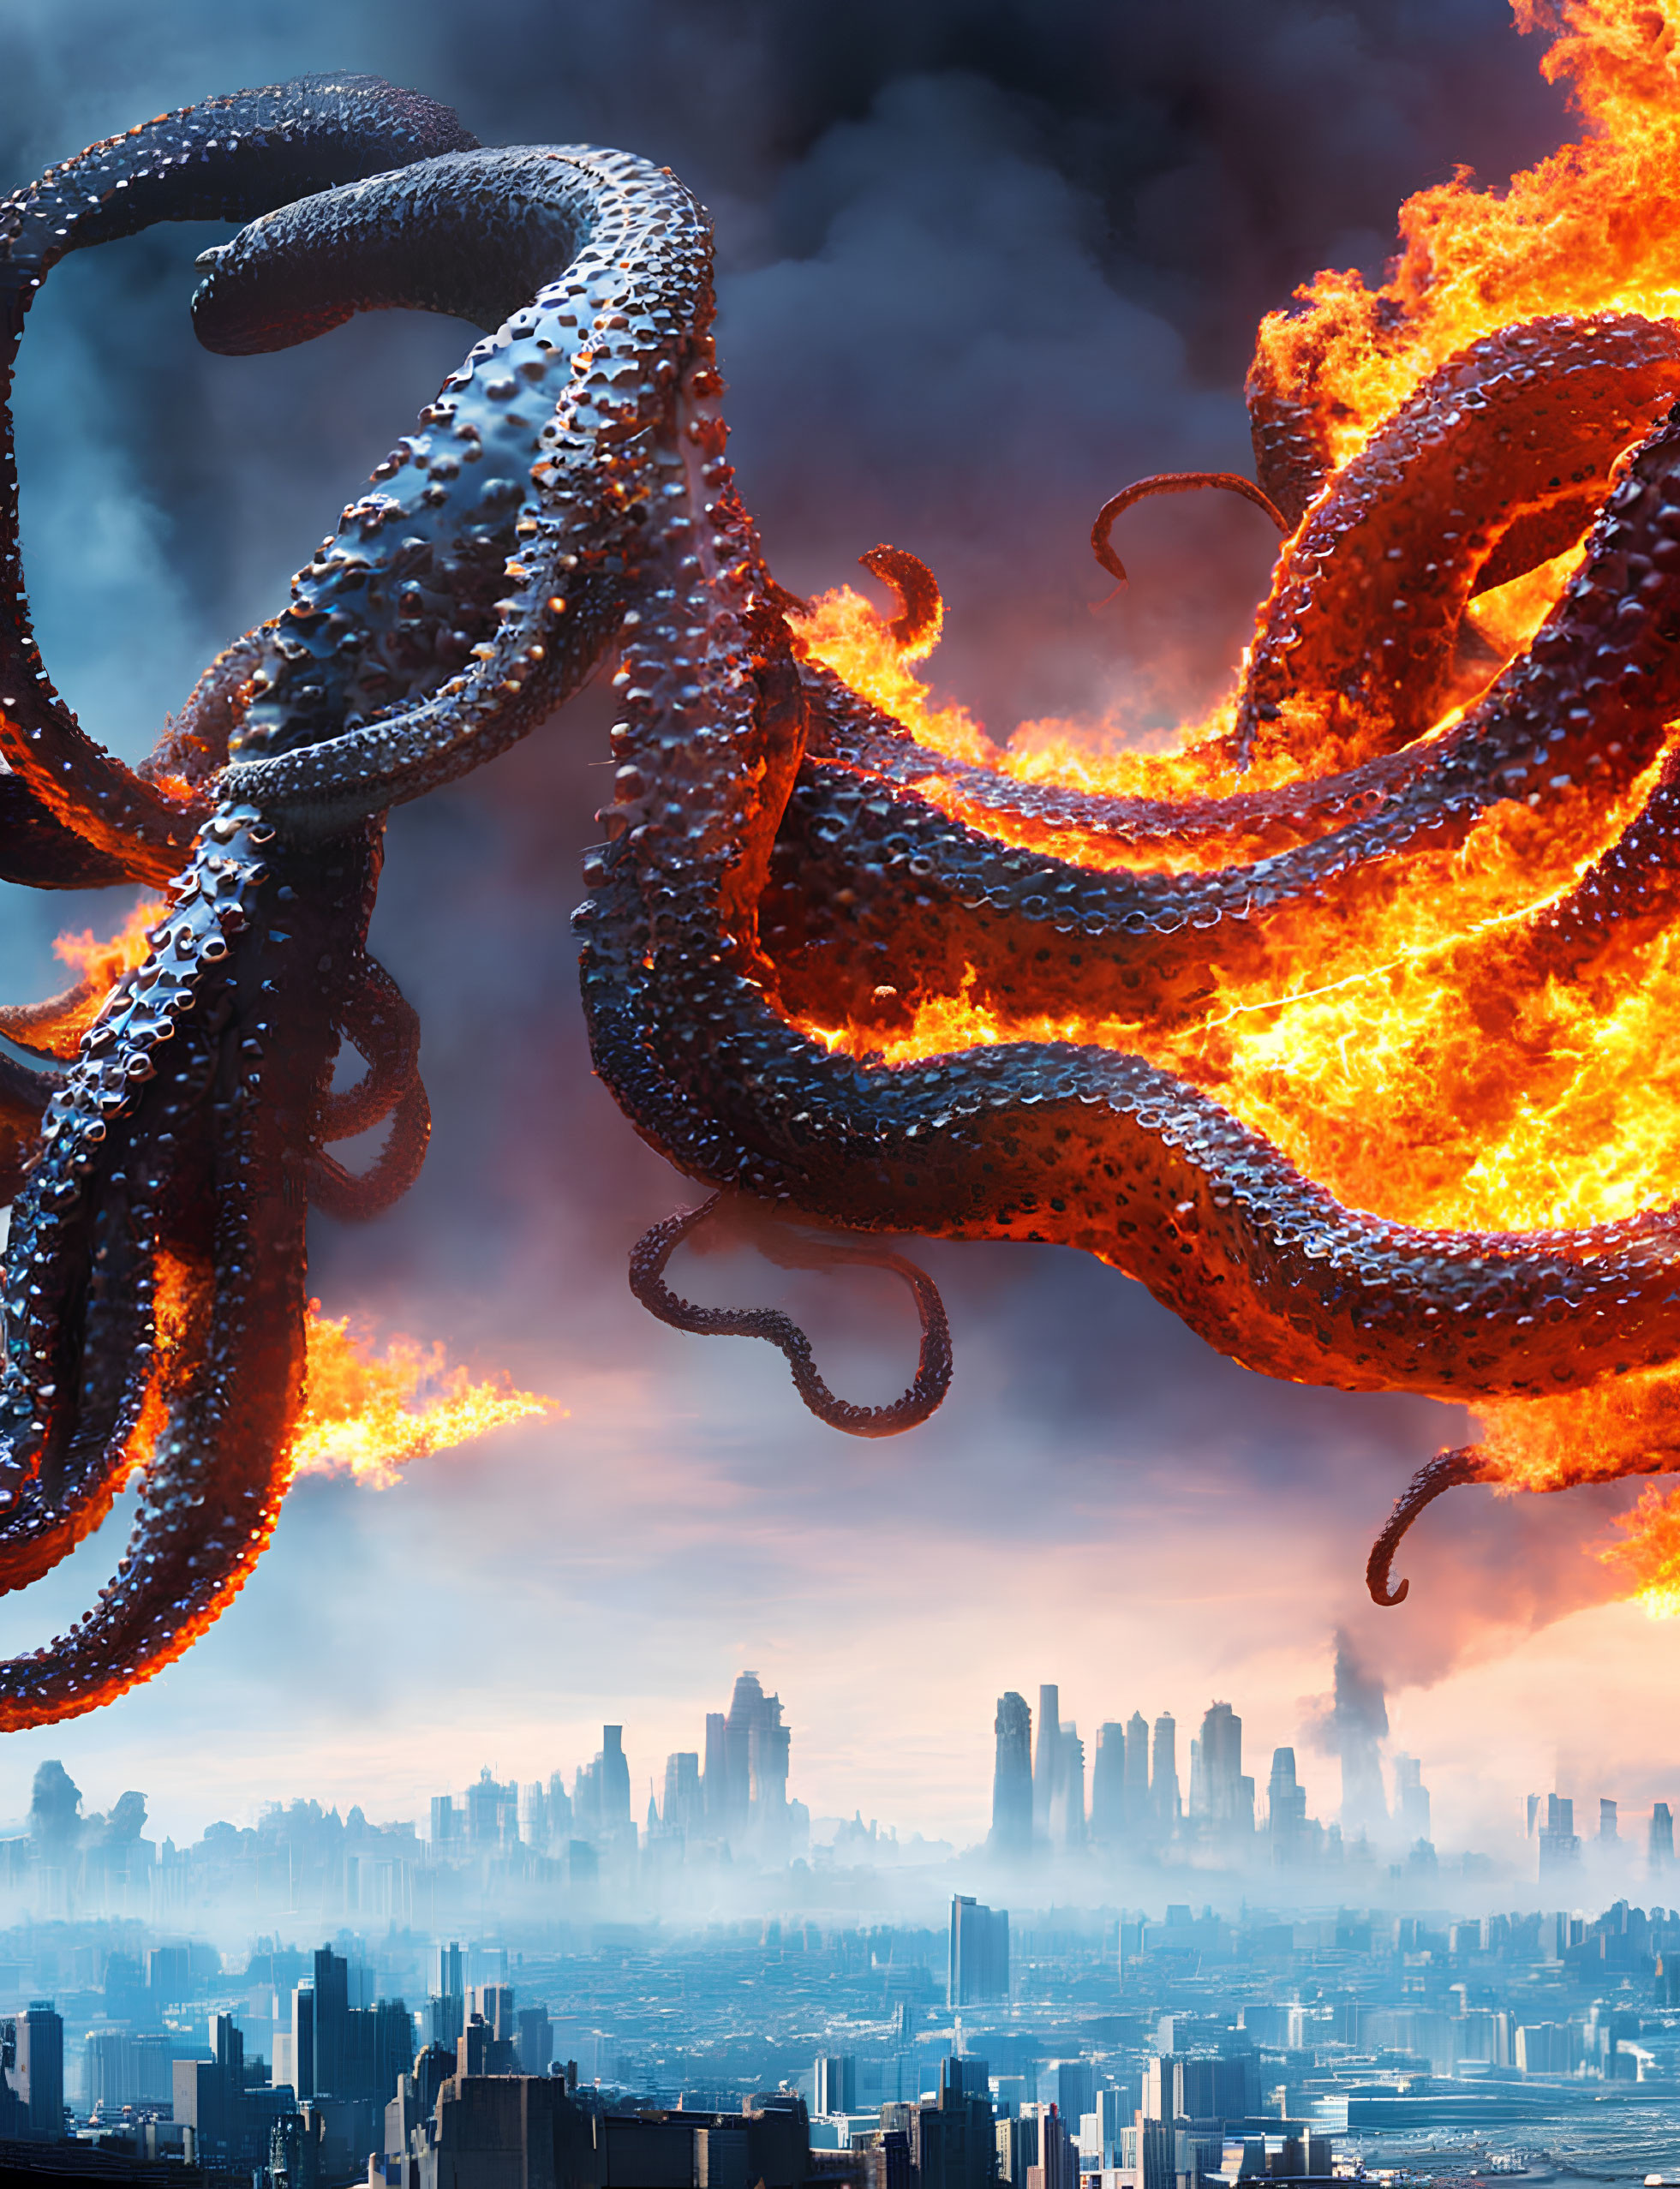 Apocalyptic cityscape engulfed by giant fiery tentacles